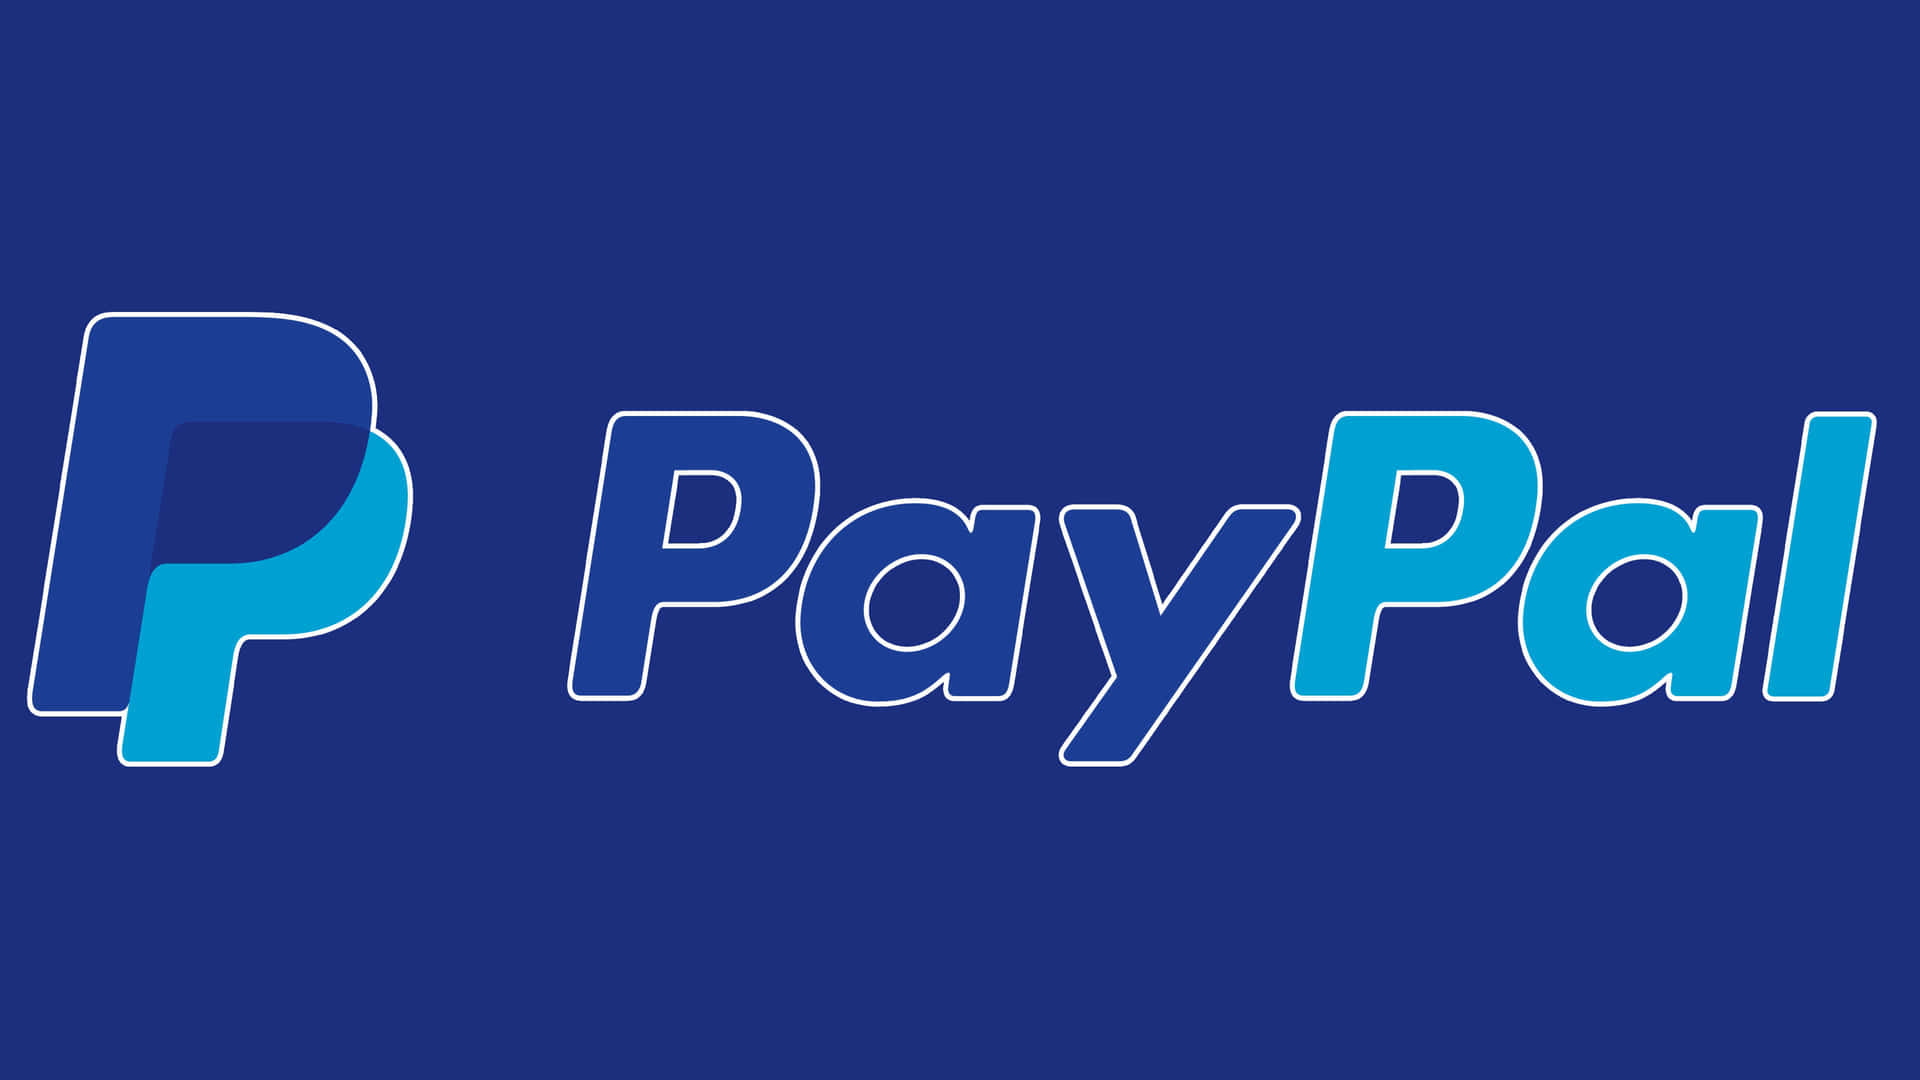 Paypal helps you handle your money transactions securely.